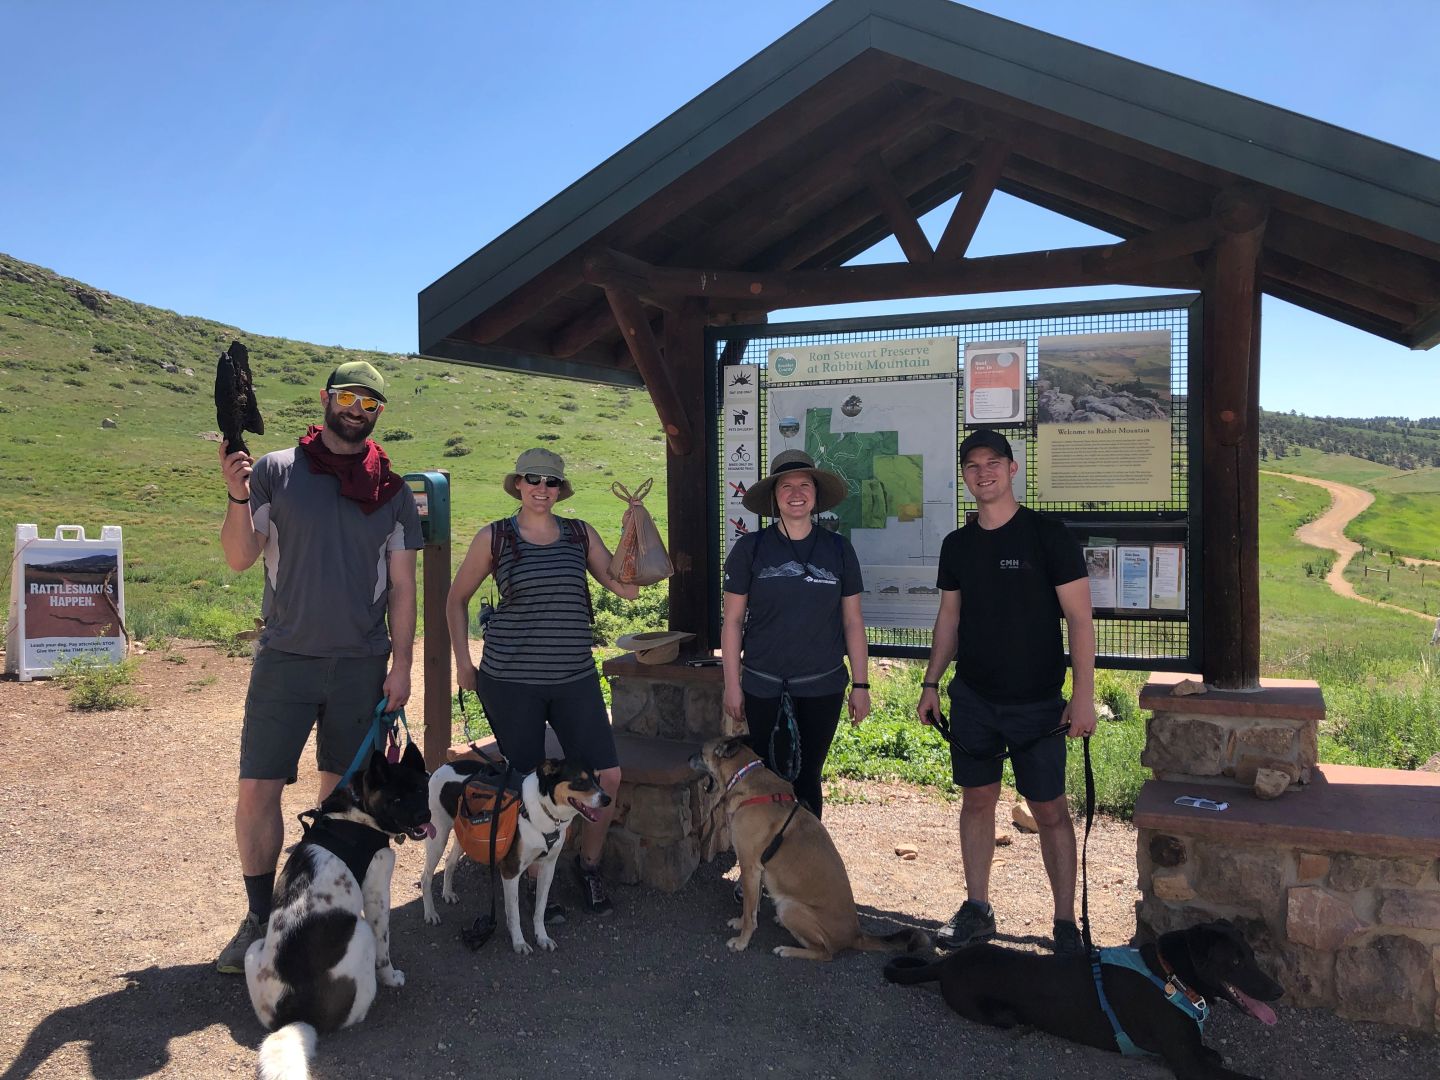 A group of dog walkers holding up bags of trash on a trail